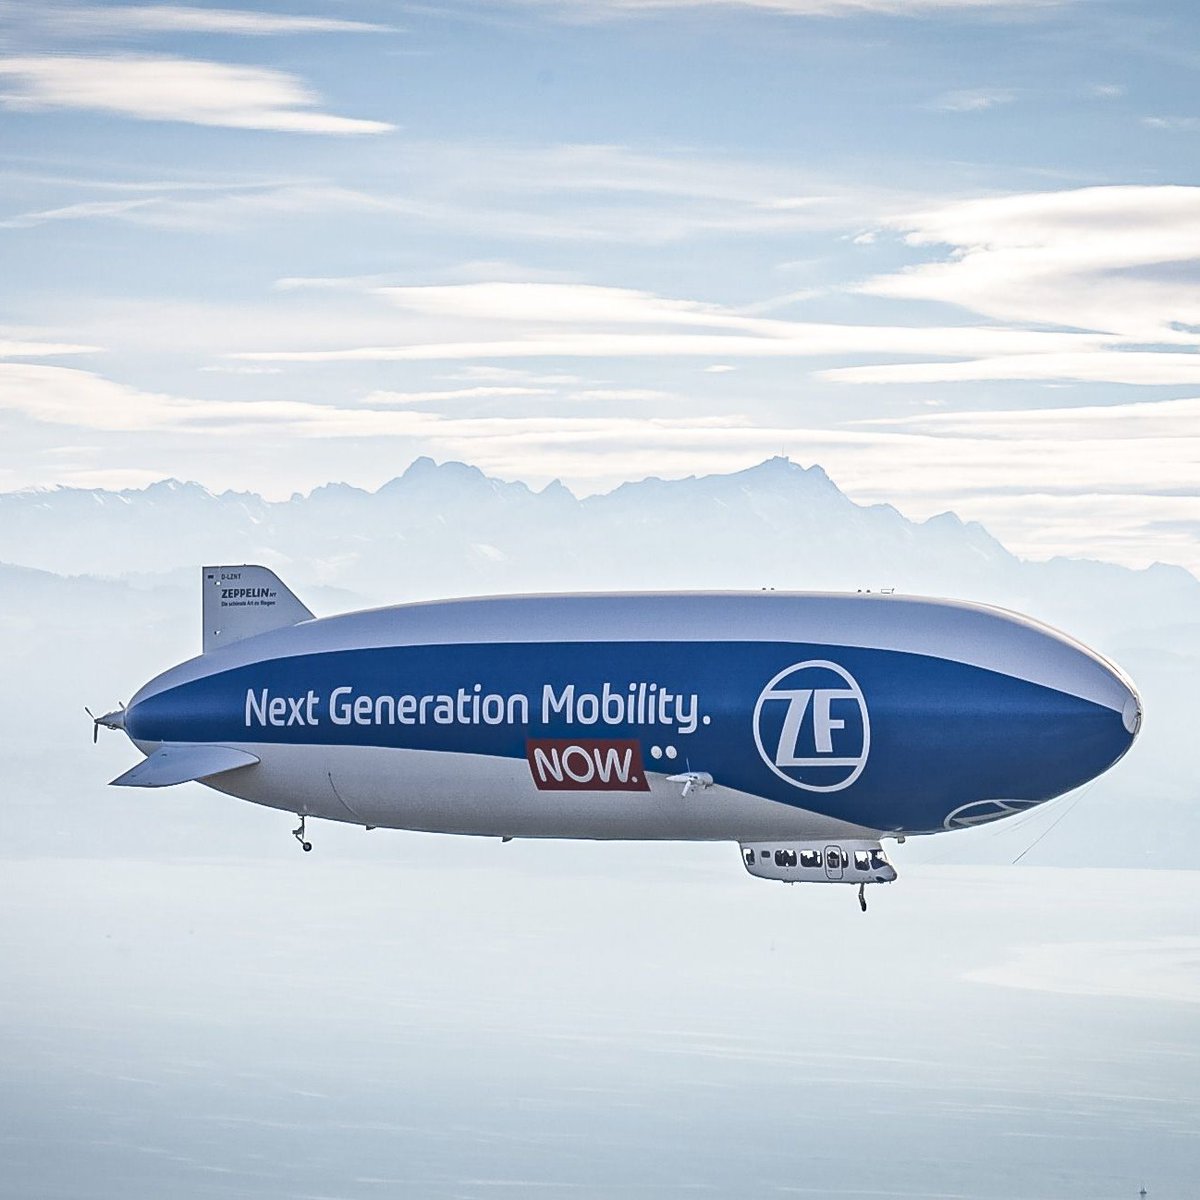 We haven't posted any #ZeppelinNT photos in a while! 

Here's the latest stunning shot from michael-haefner.com to make up for it.

#AirshipAssociation #ZeppelinNT #LTANews #airships #HybridVehicles #blimps #zeppelins #aerostats #HAPS #LTA #LighterThanAir #helium #aviation